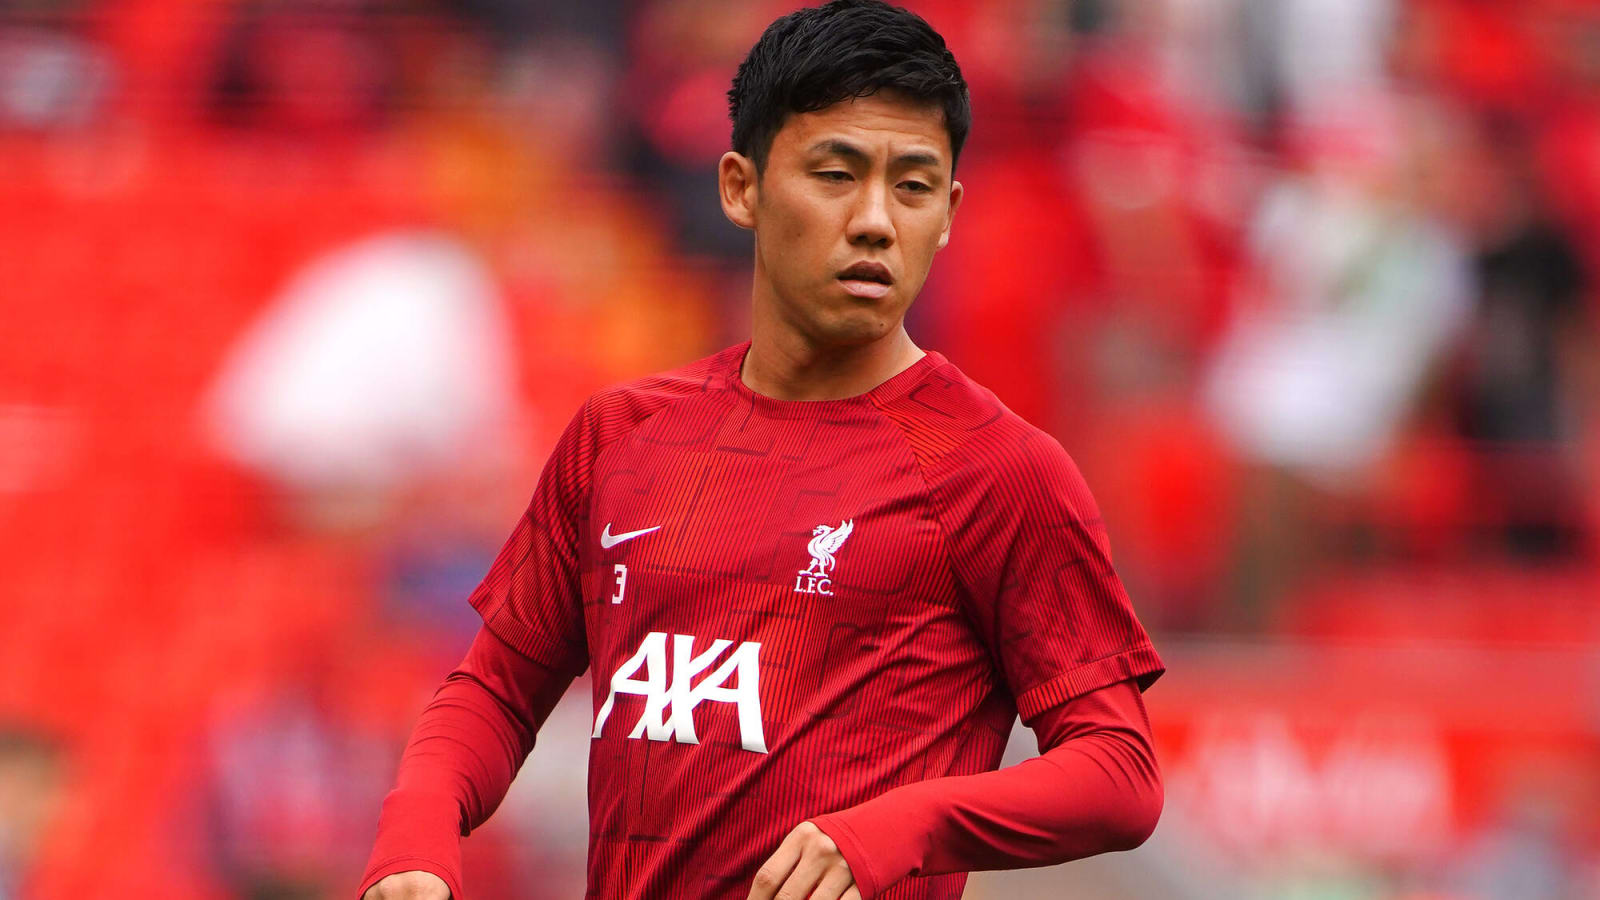 Liverpool will not sign another defensive midfielder this summer says Reds journalist after Endo arrival